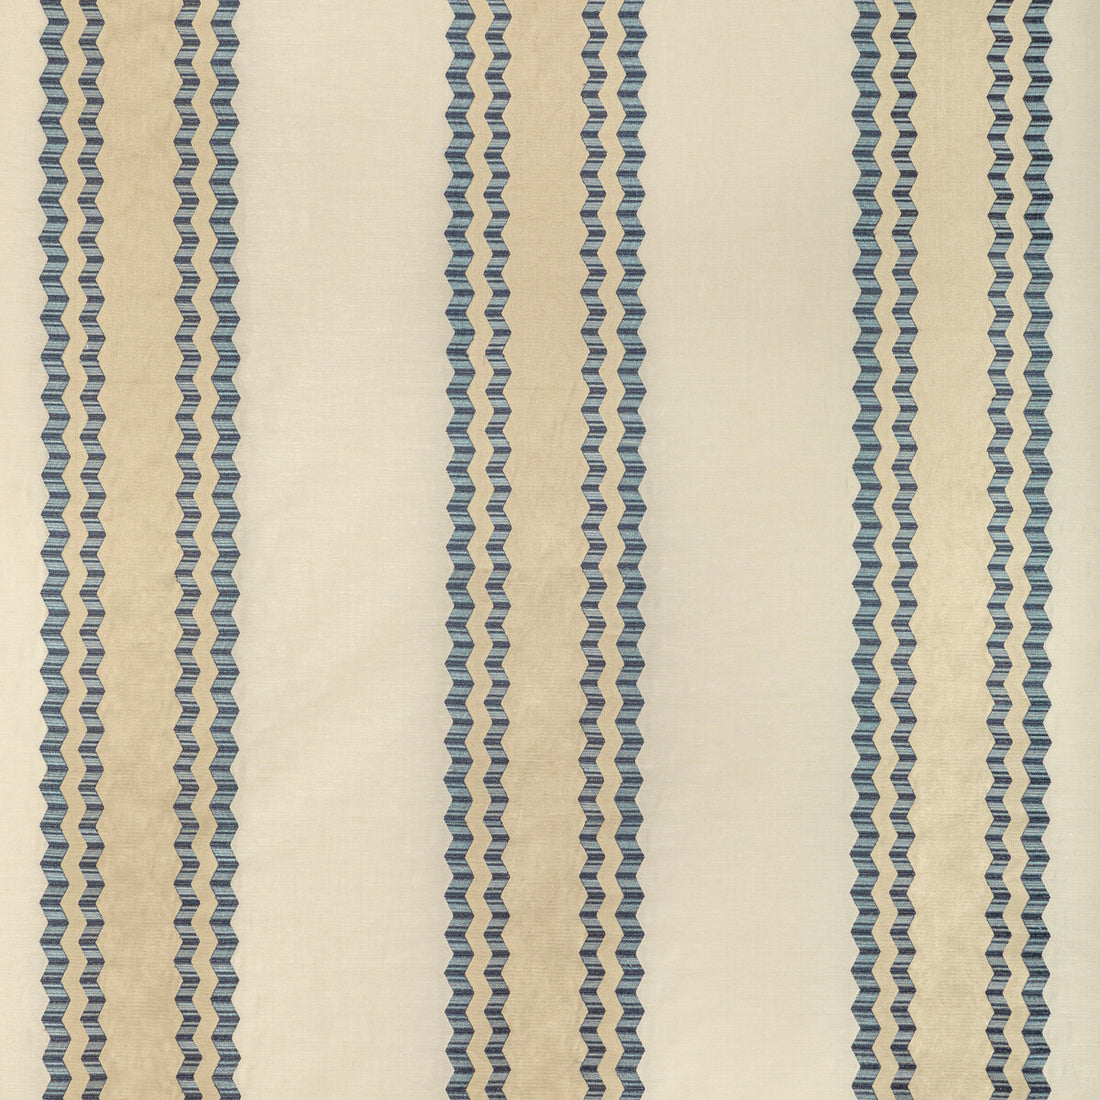 Waldon Stripe fabric in blue color - pattern 2022113.1615.0 - by Lee Jofa in the Bunny Williams Arcadia collection